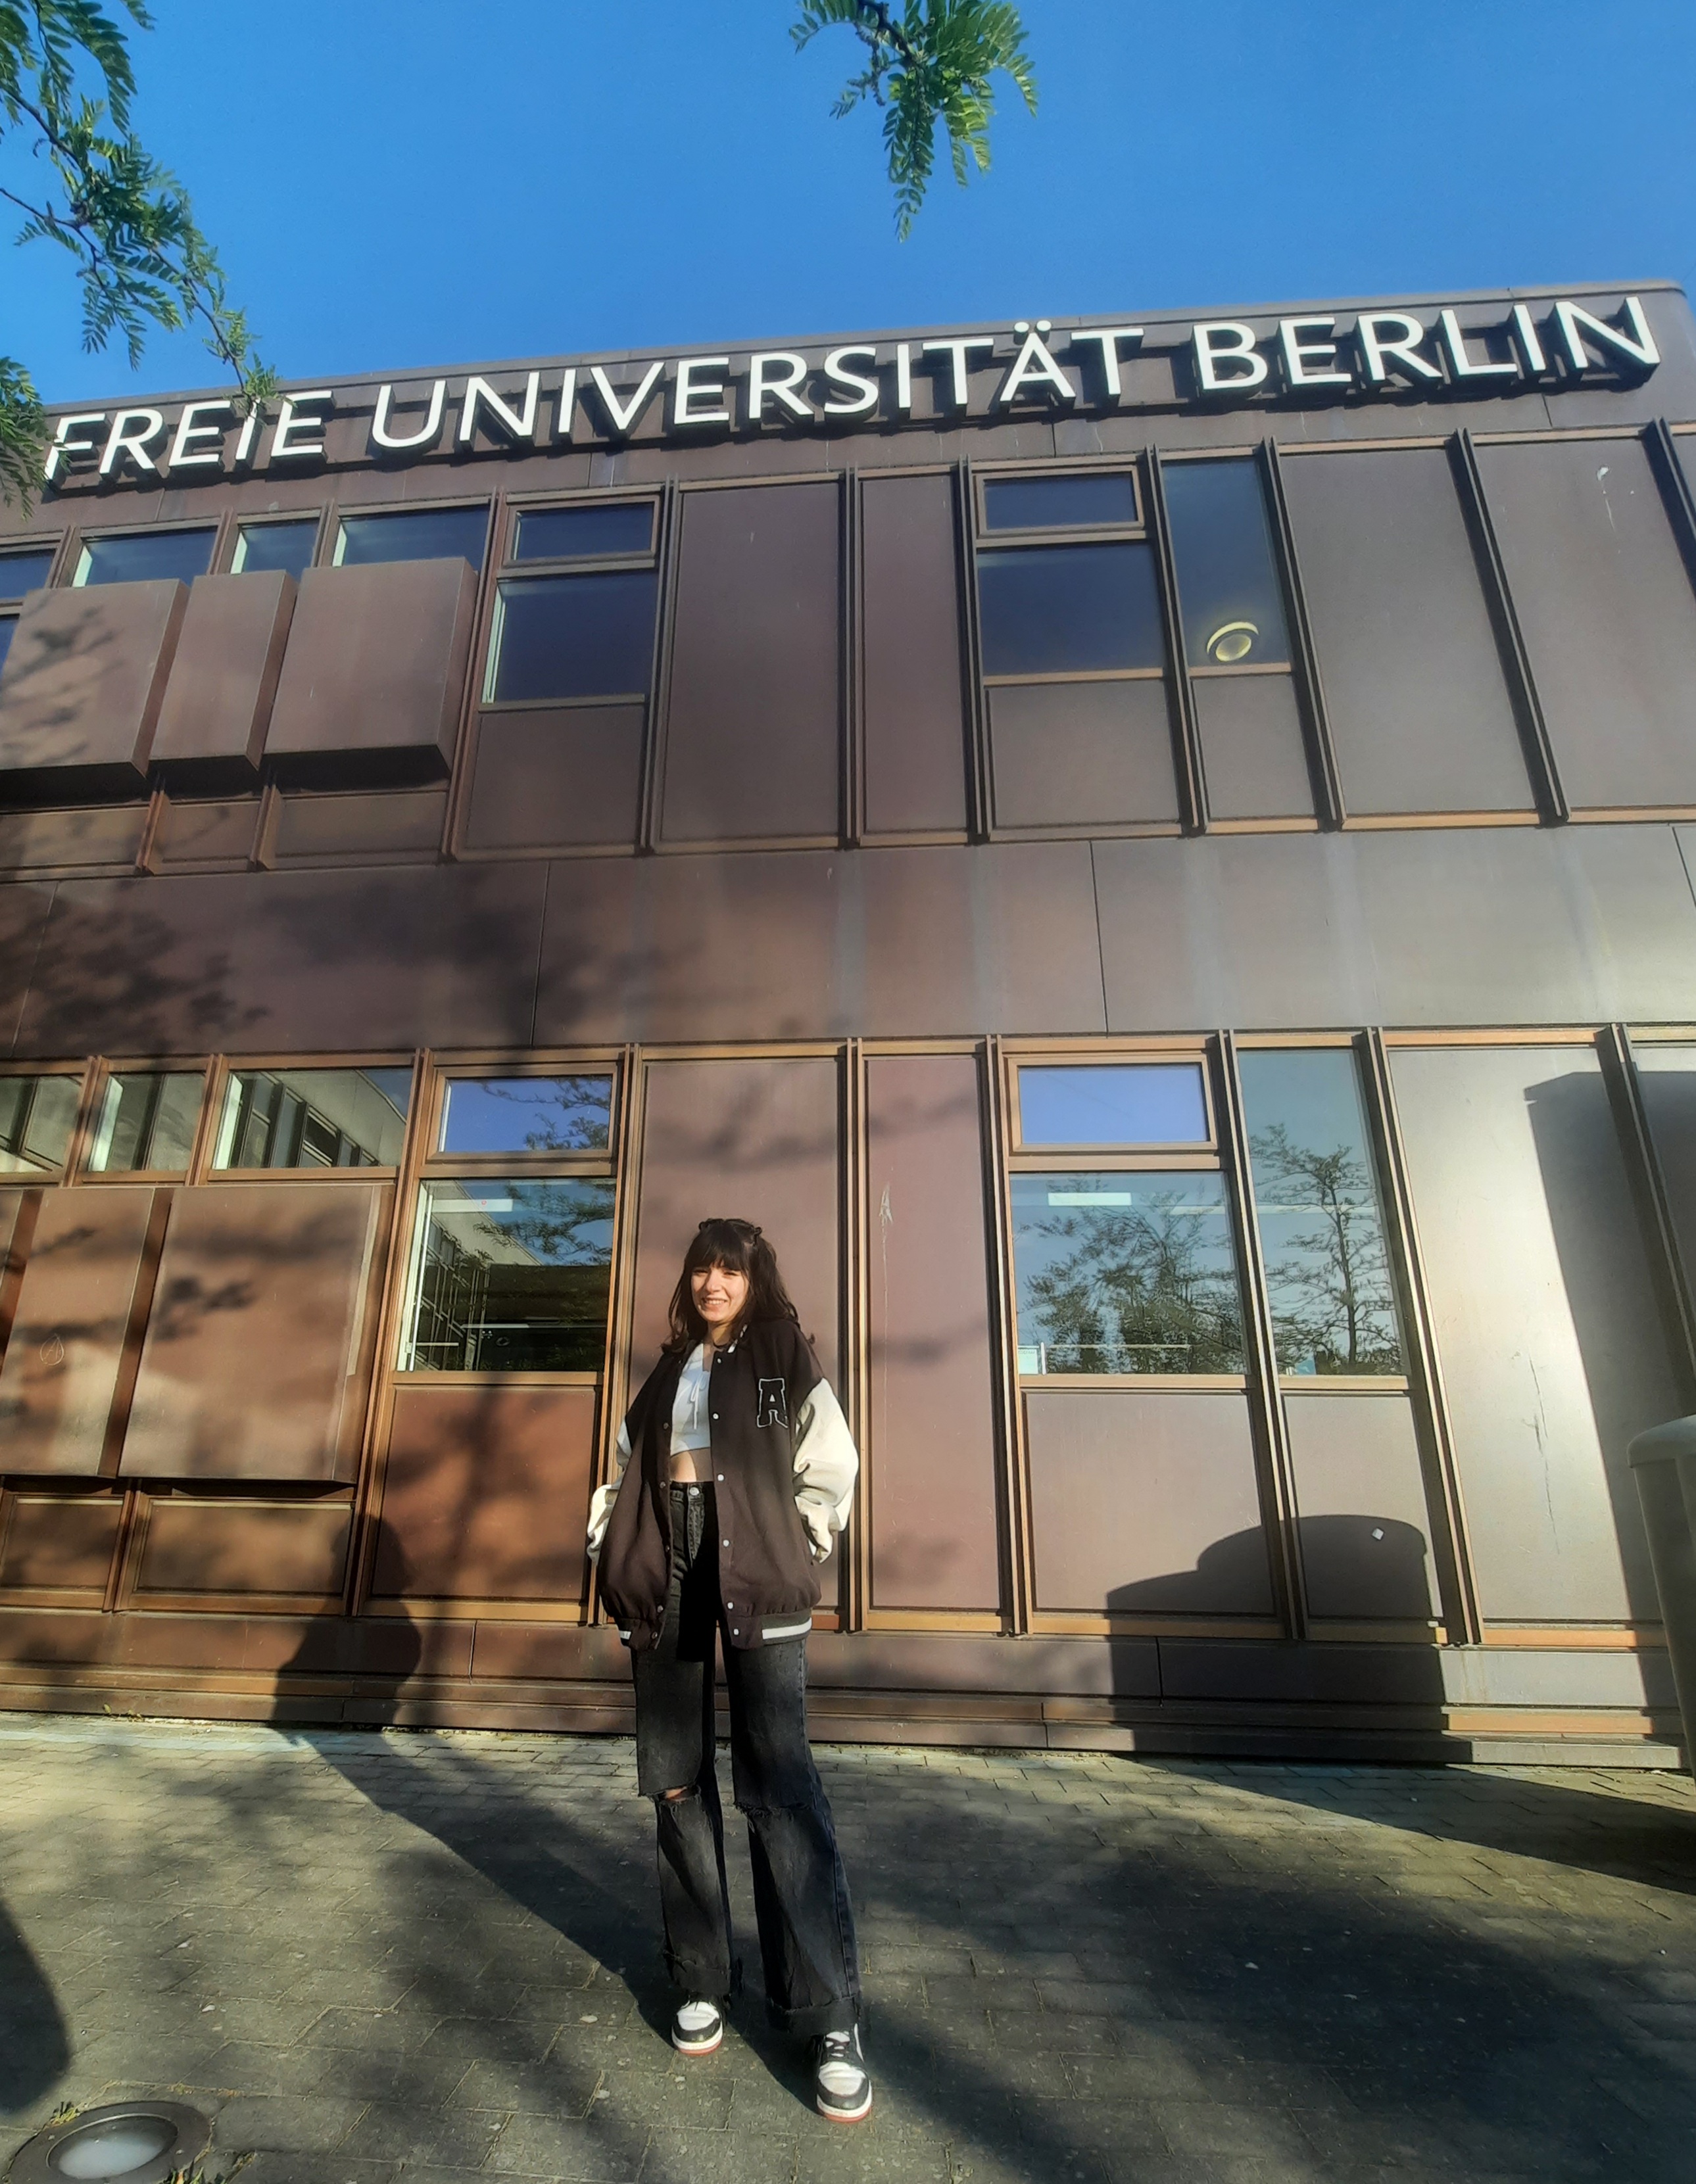 Lina Meghouche in front of the Freie Universität of Berlin